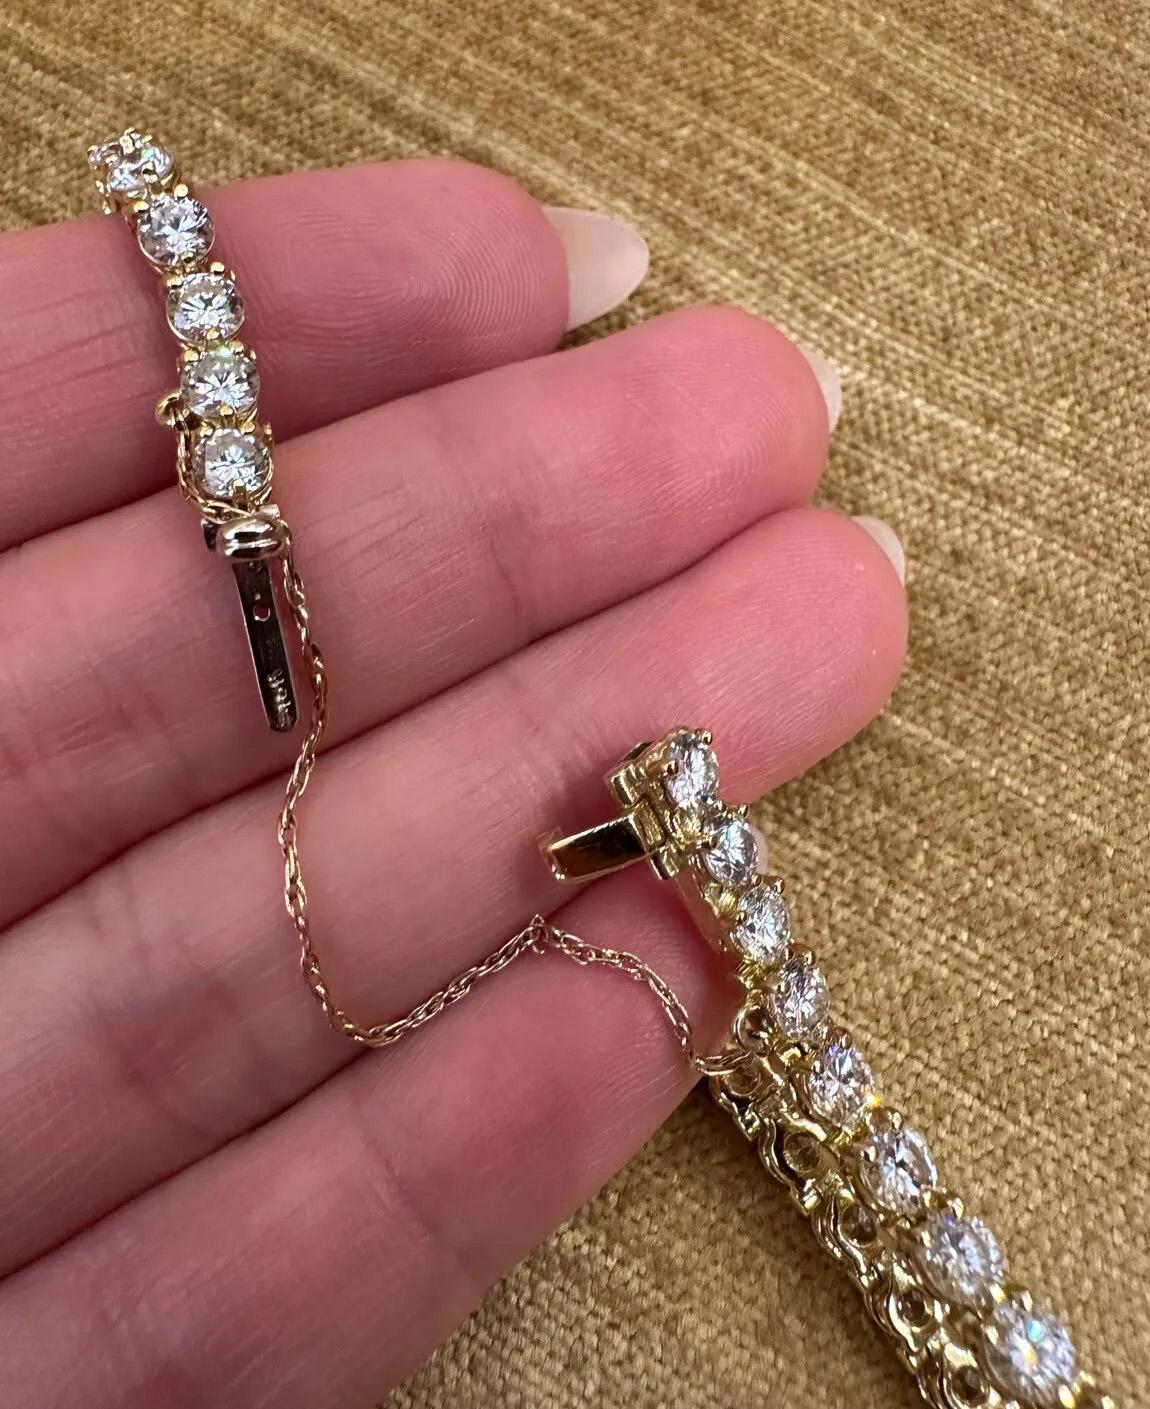 Round Brilliant Diamond Tennis Bracelet 9.00 Carat Total Weight in 18k Yellow Gold

Classic Diamond Tennis Bracelet features 38 Round Brilliant Diamonds prong set in 18k Yellow Gold. Bracelet is secured by a tongue clasp with safety bar and